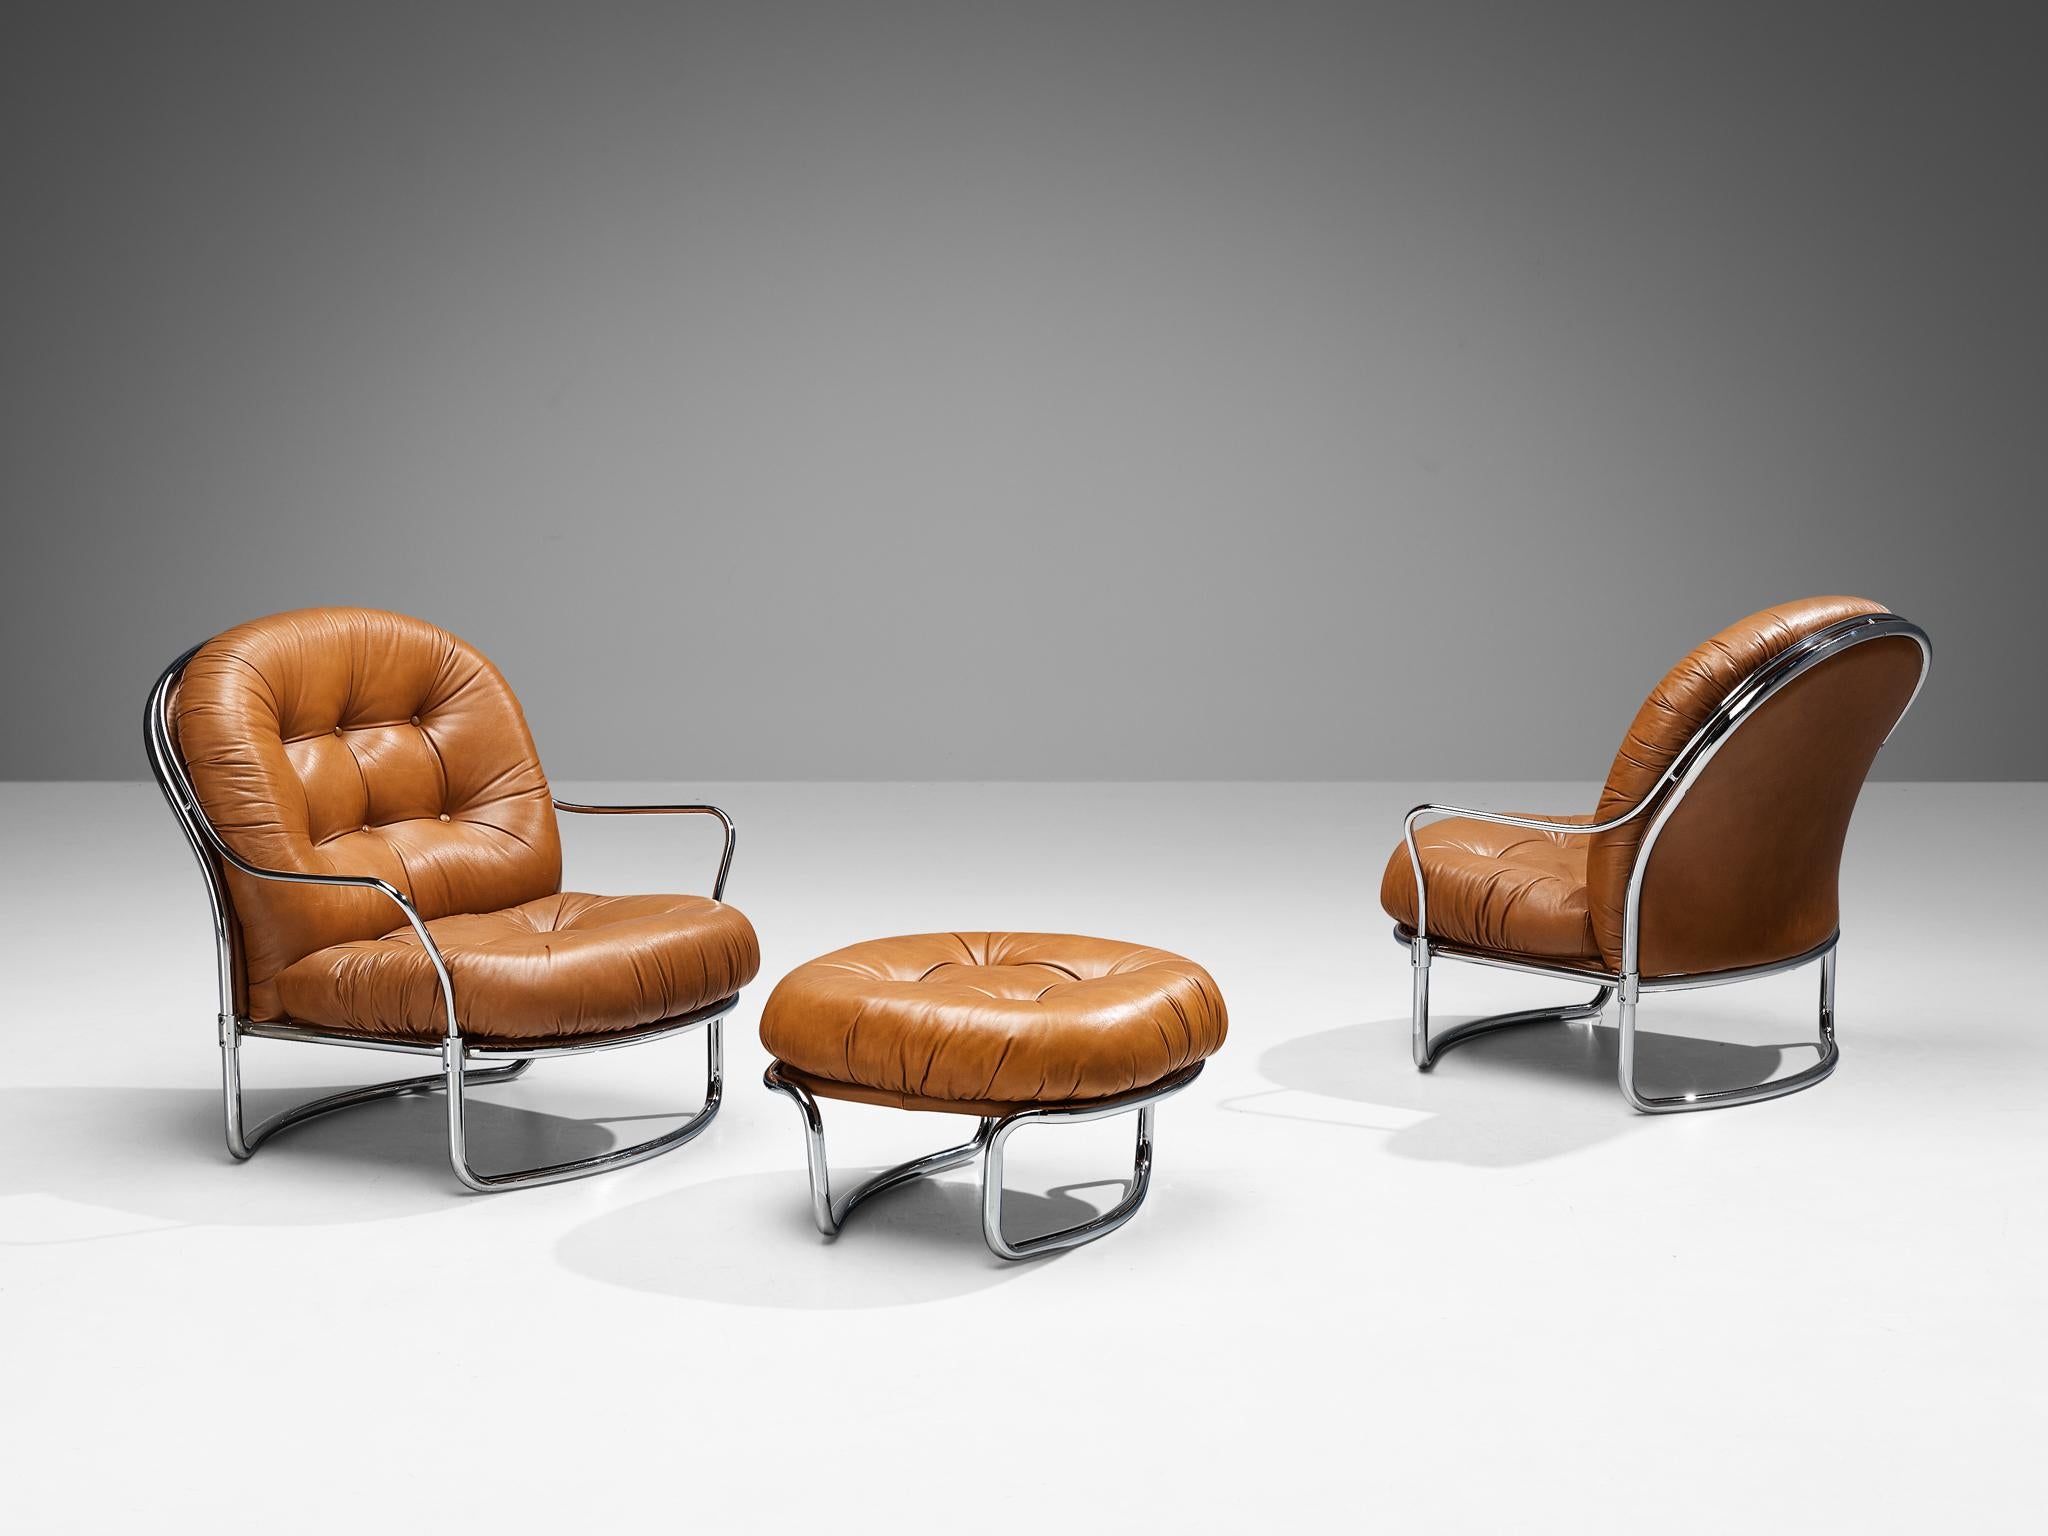 Carlo De Carli for Cinova, pair of '915' lounge chairs with ottoman, chrome-plated steel, cognac leather, Italy, design 1969

Beautiful set of armchairs and ottoman designed by Italian designer Carlo De Carli for manufacturer Cinova in 1969. These